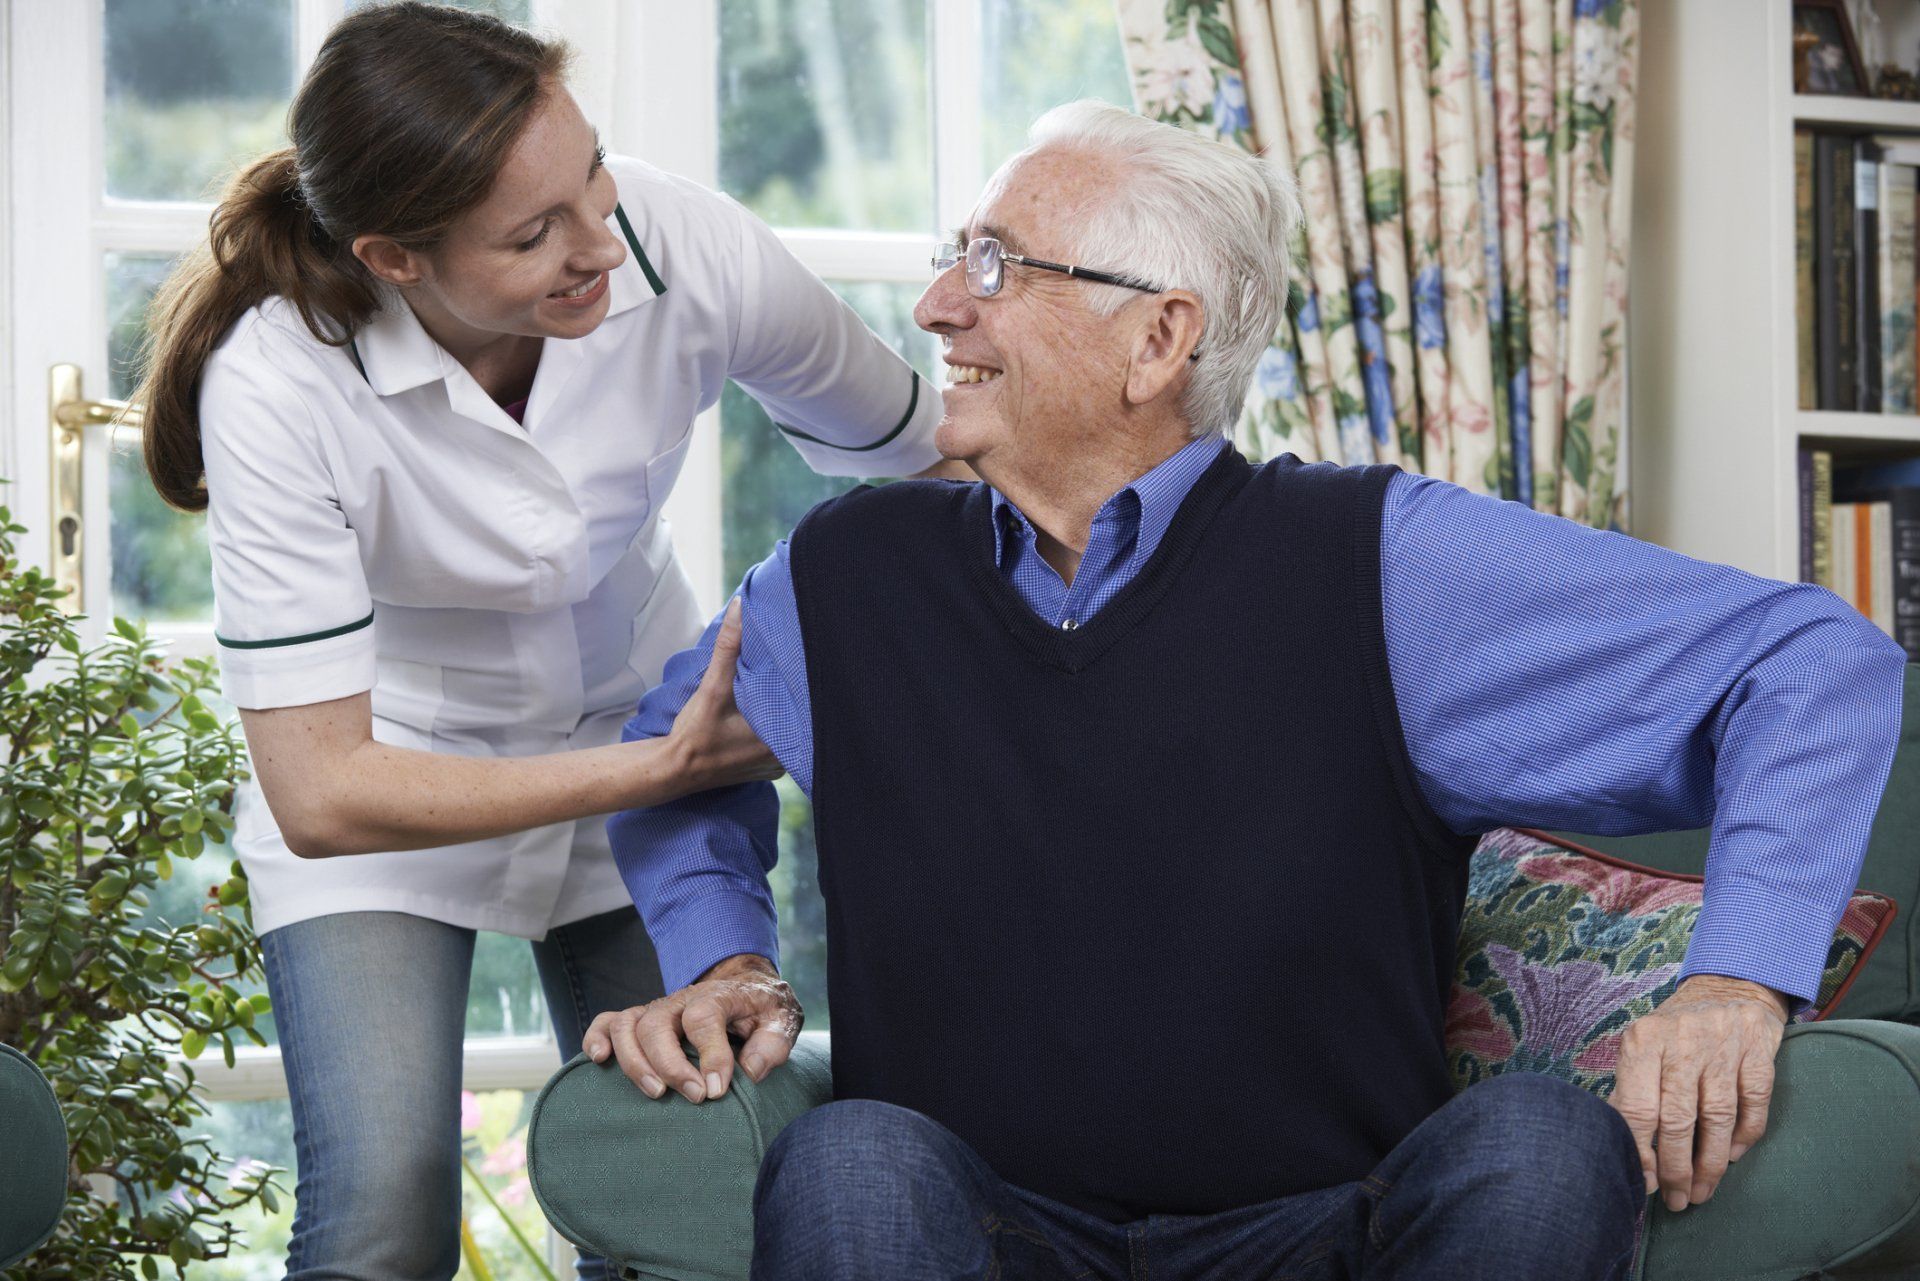 caregiver and elderly patient smiling at each other